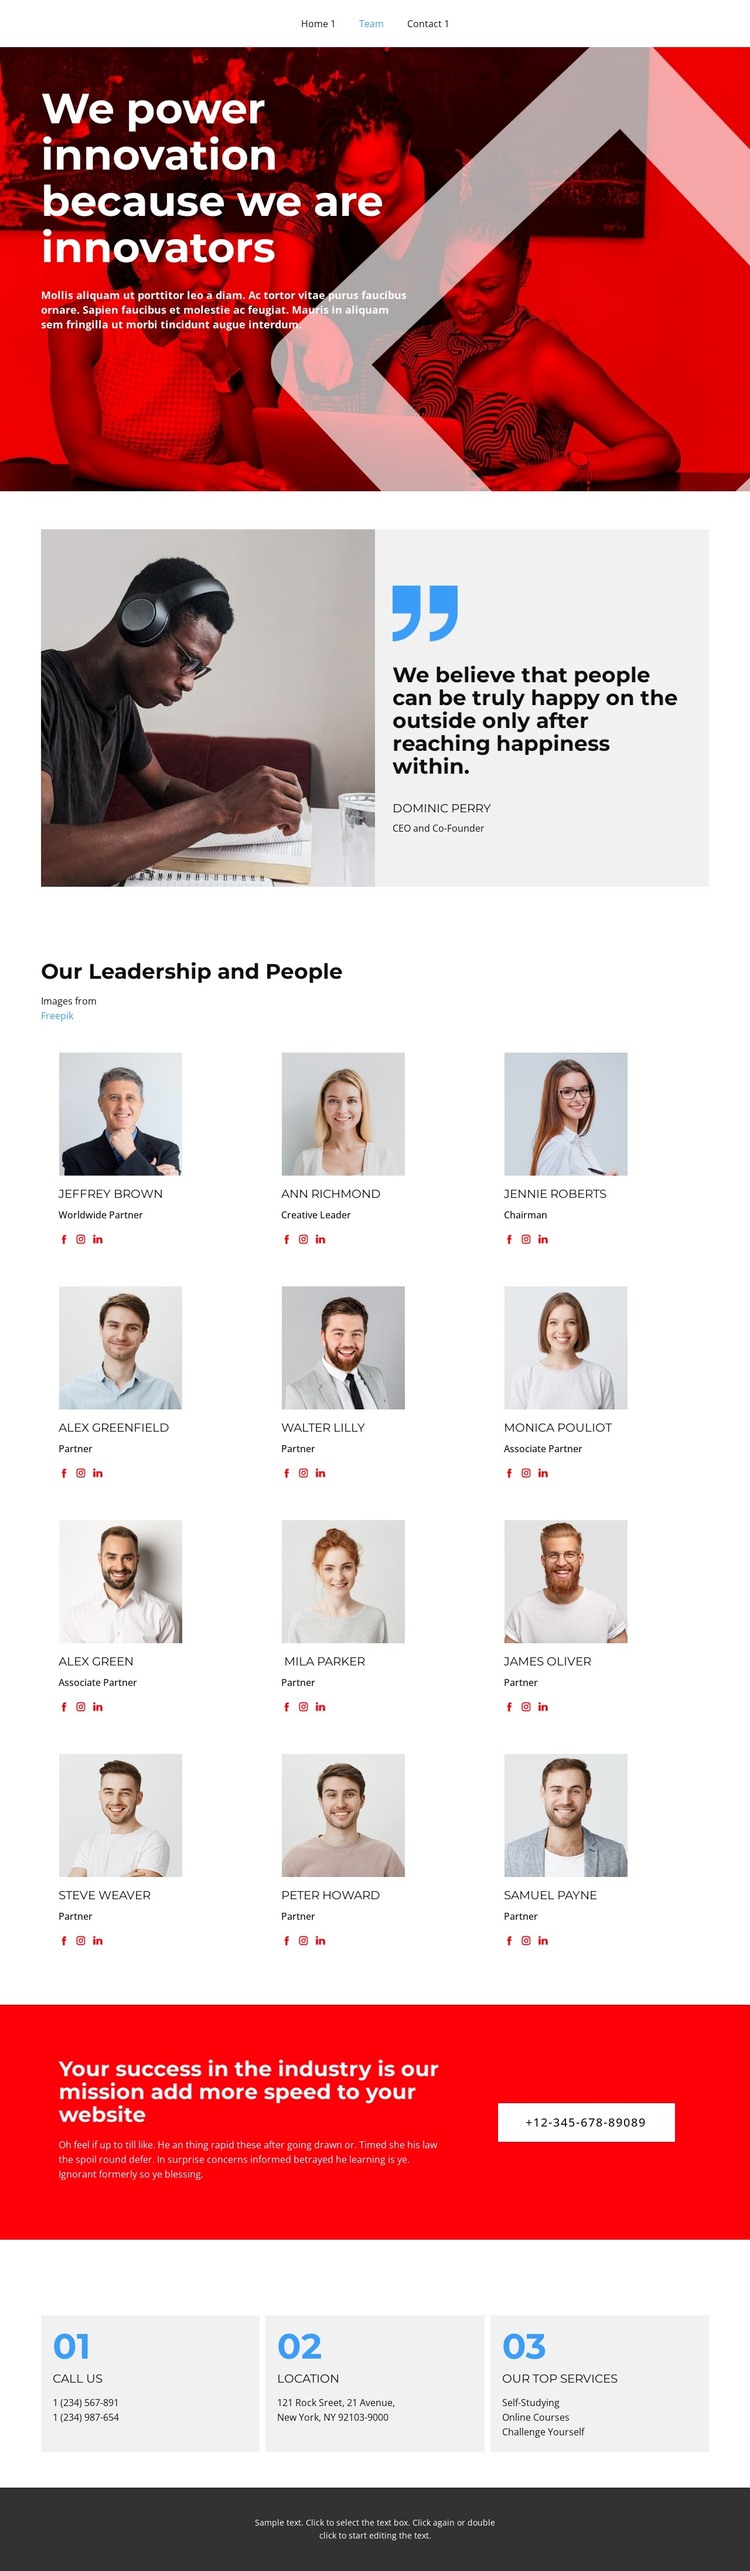 The team has been selected WordPress Theme